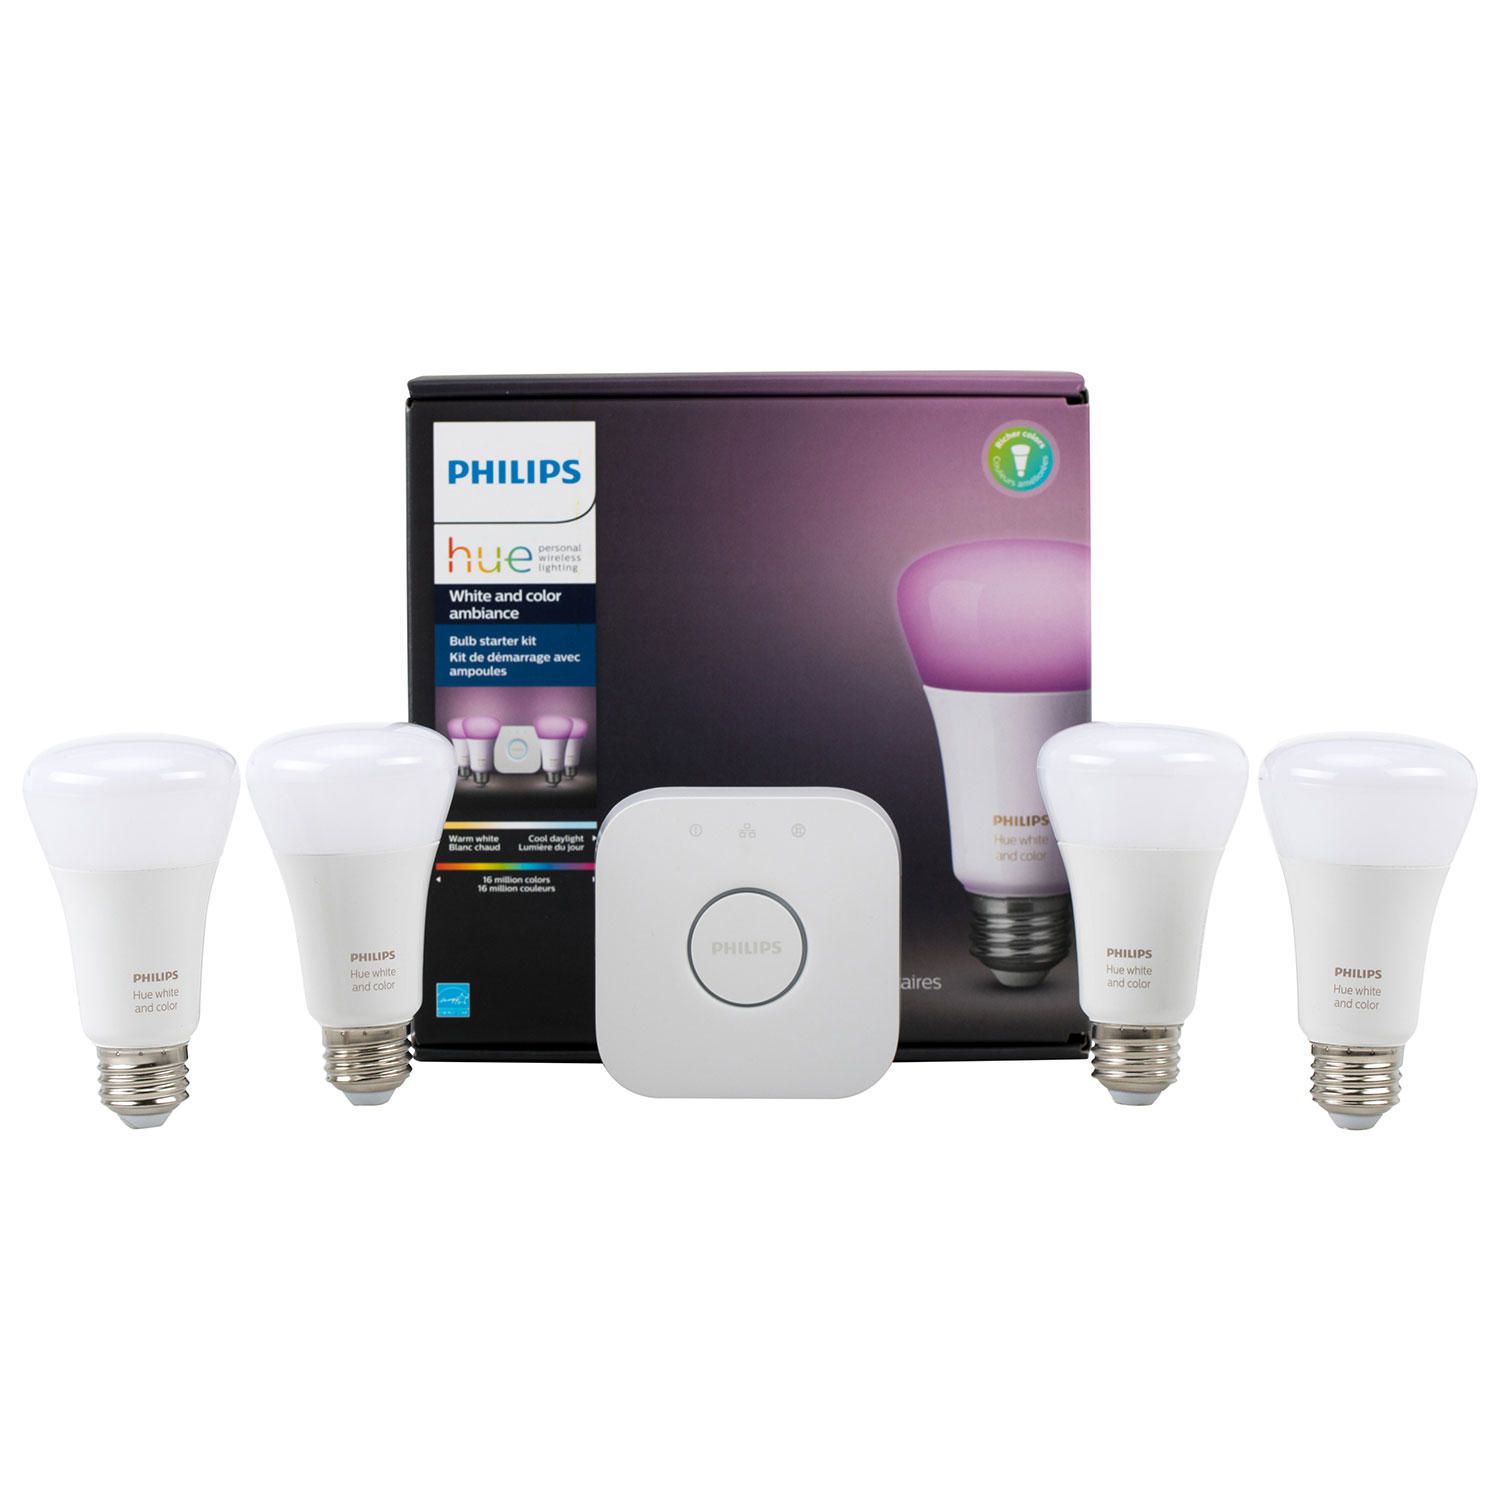 Philips HUE White And Color Ambiance A19 Starter Kit | Walmart Canada